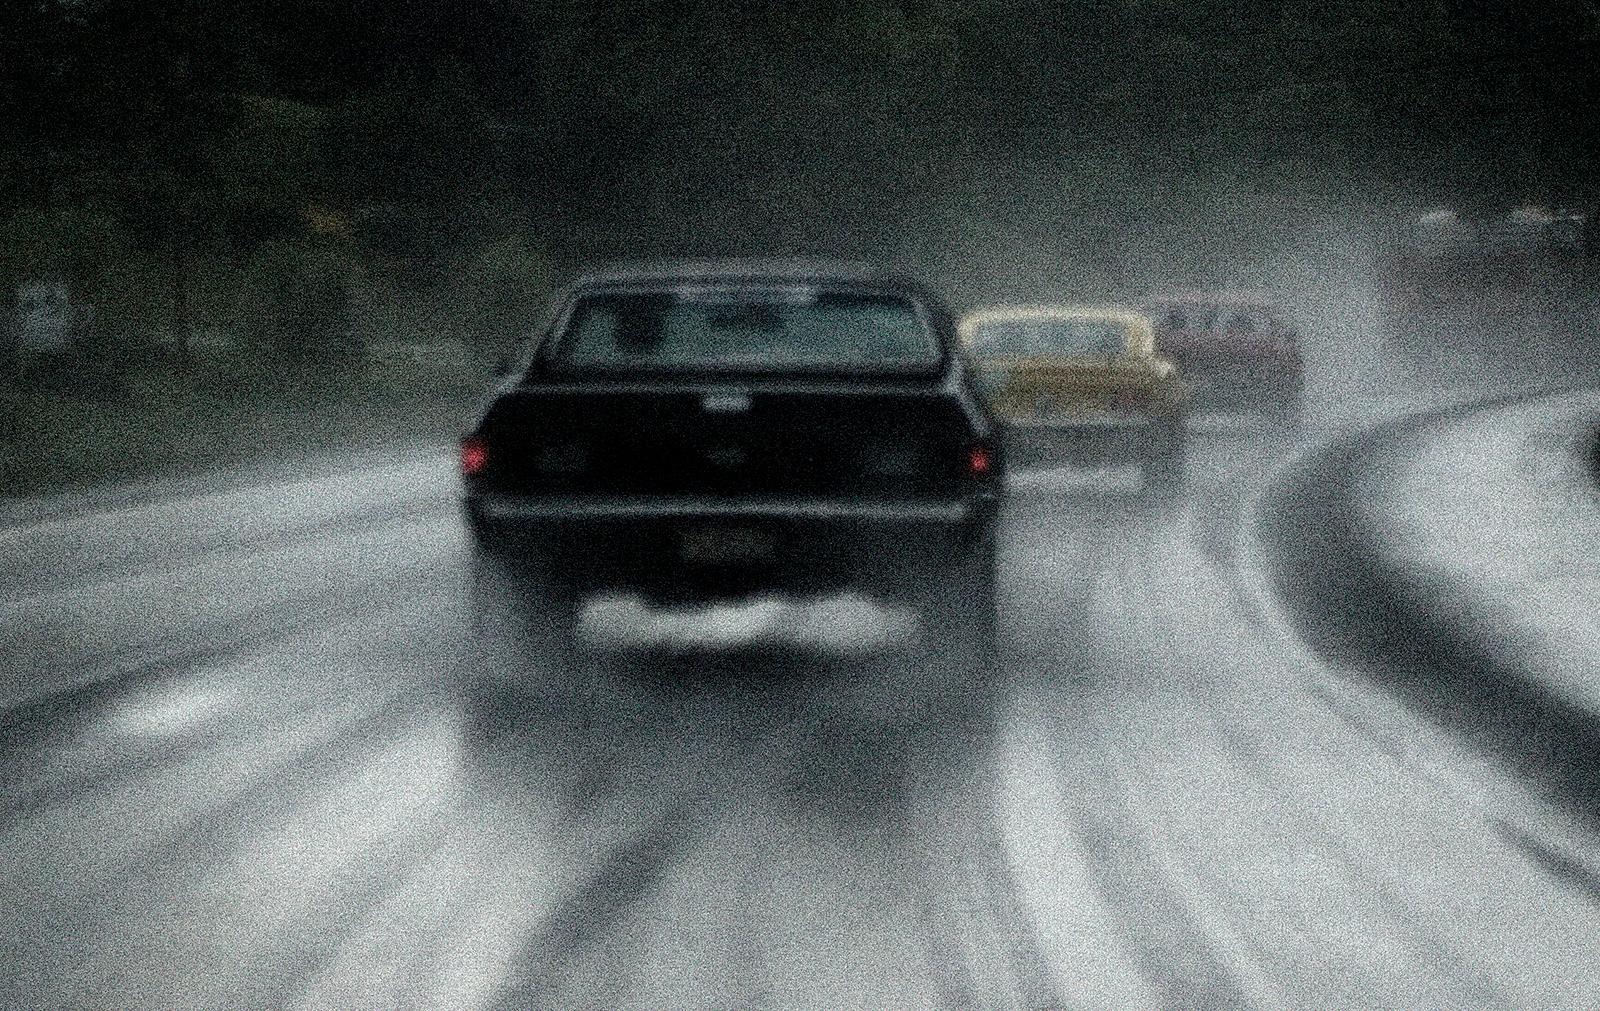 Heavy rain -Signed limited edition archival pigment print, Contemporary photo, USA